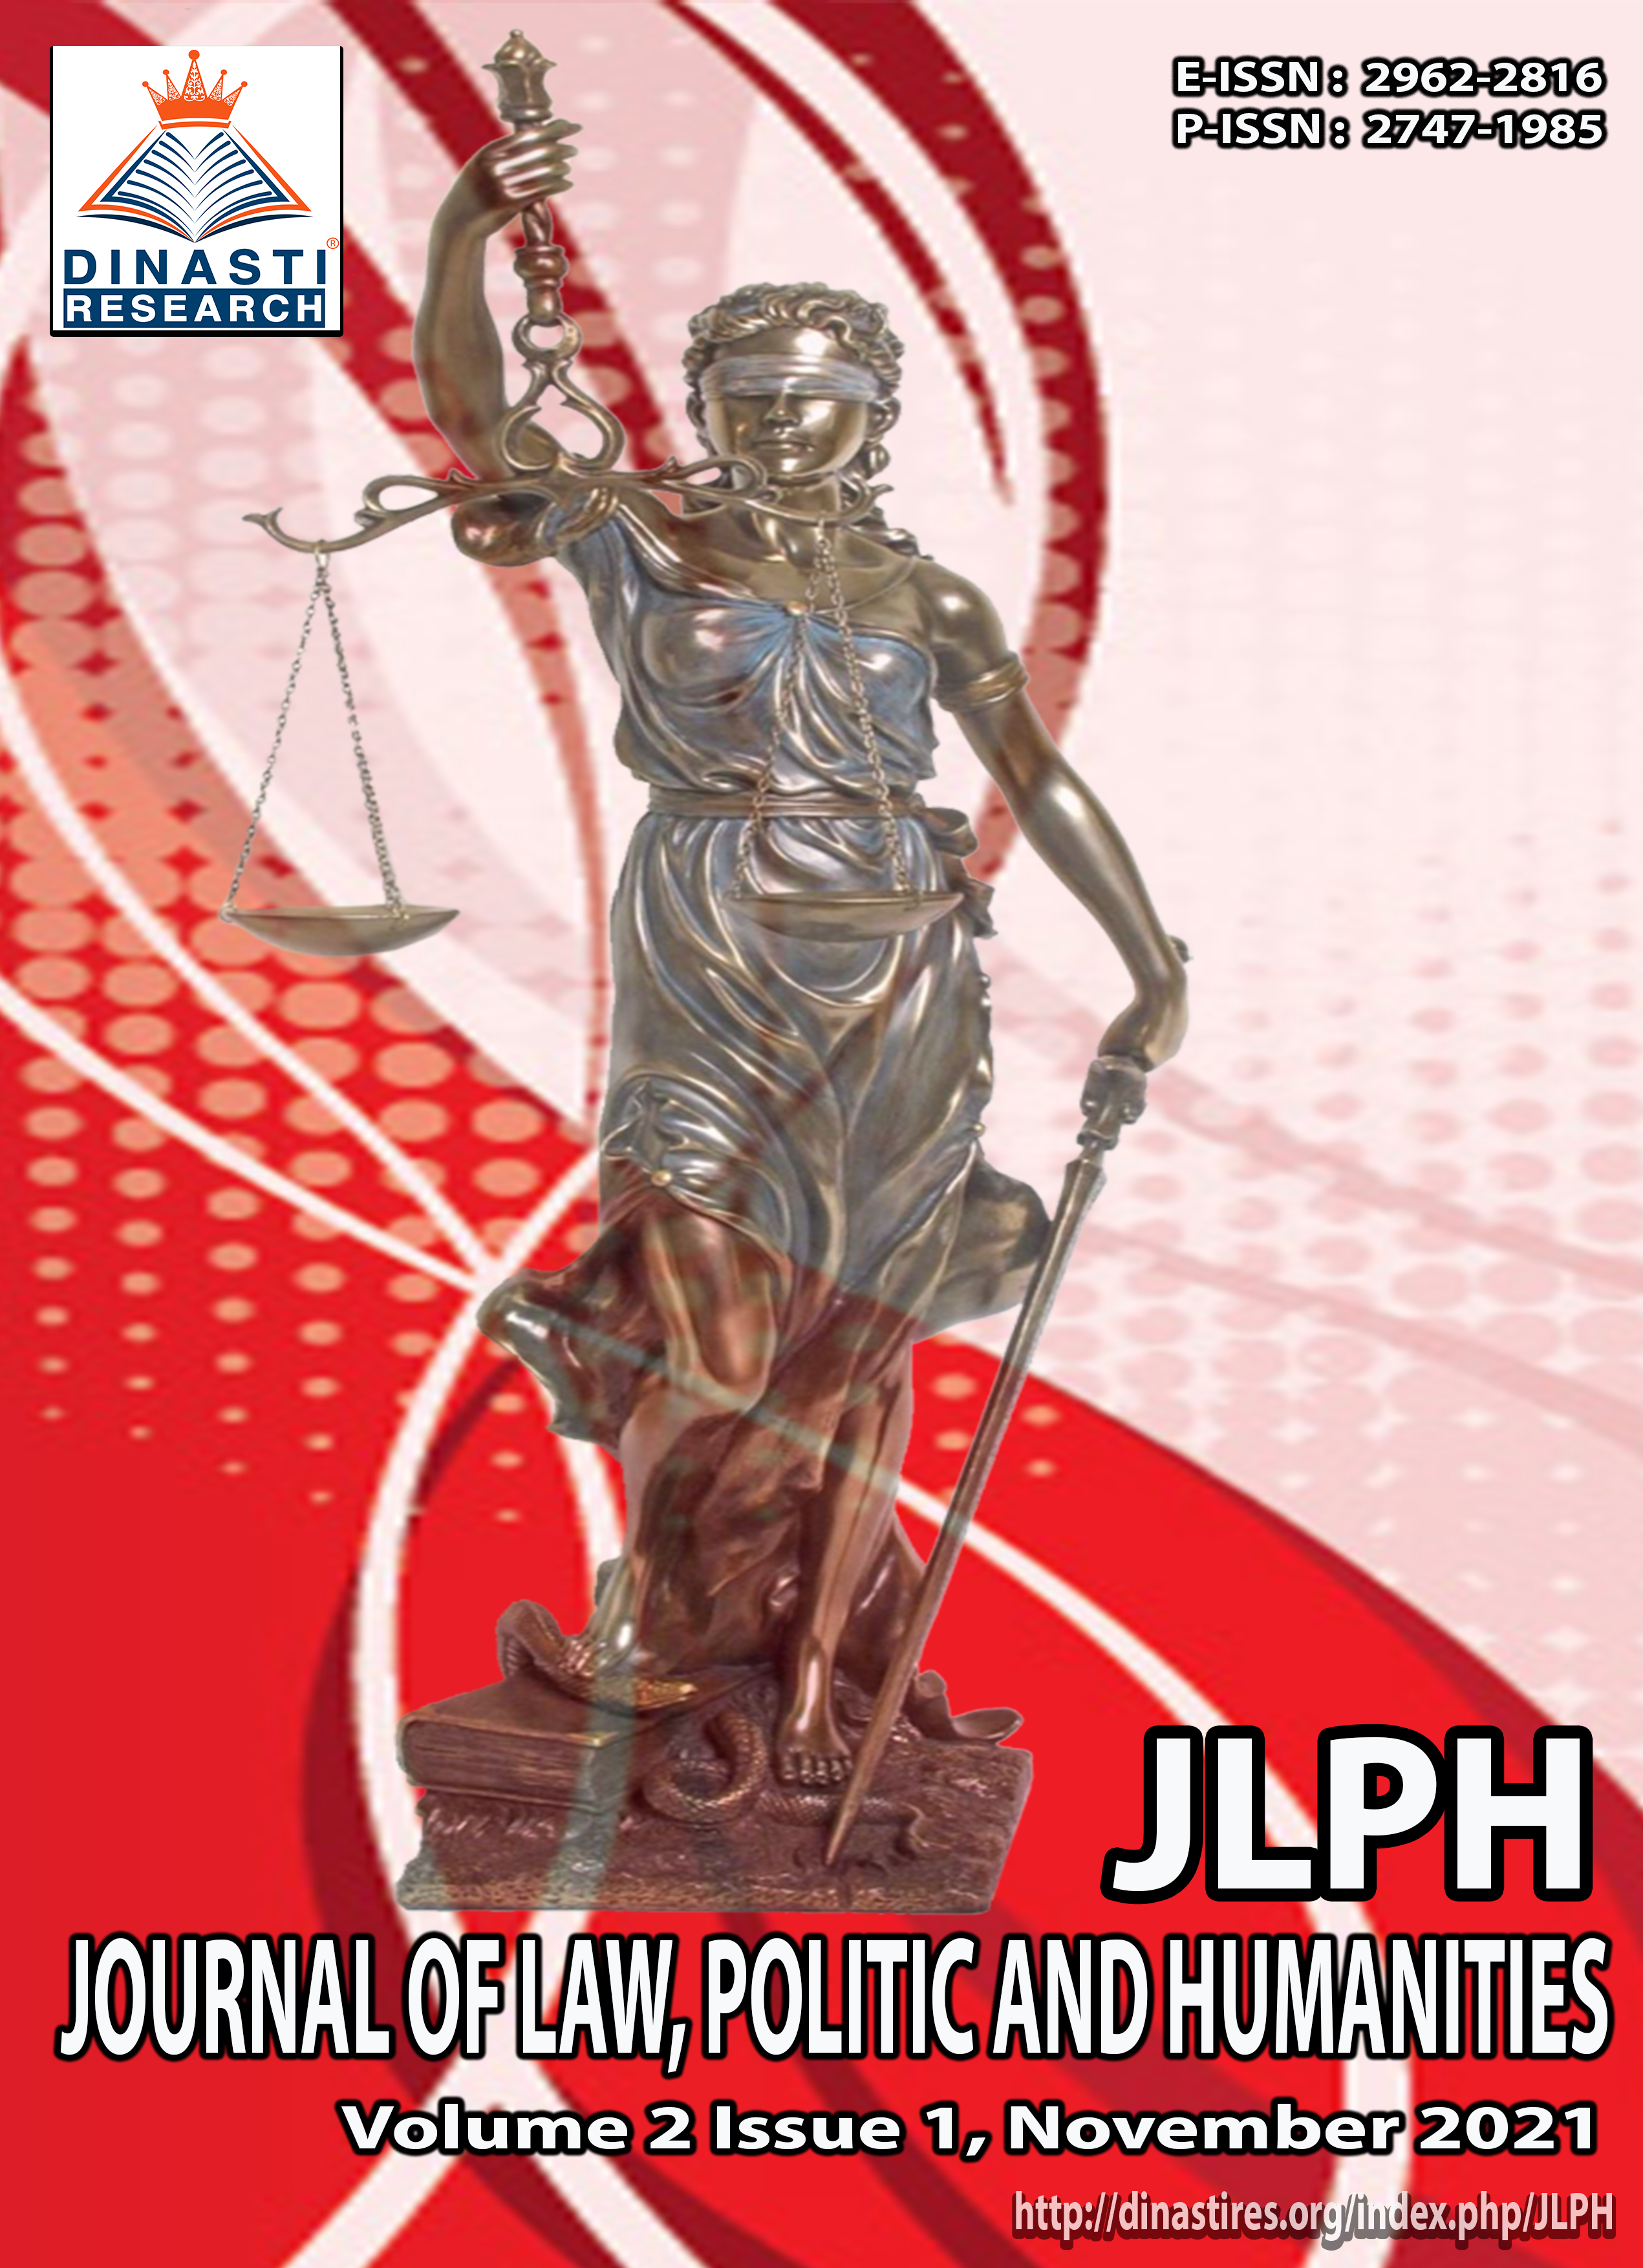 					View Vol. 2 No. 1 (2021): (JLPH) Journal of Law, Politic and Humanities (November 2021)
				